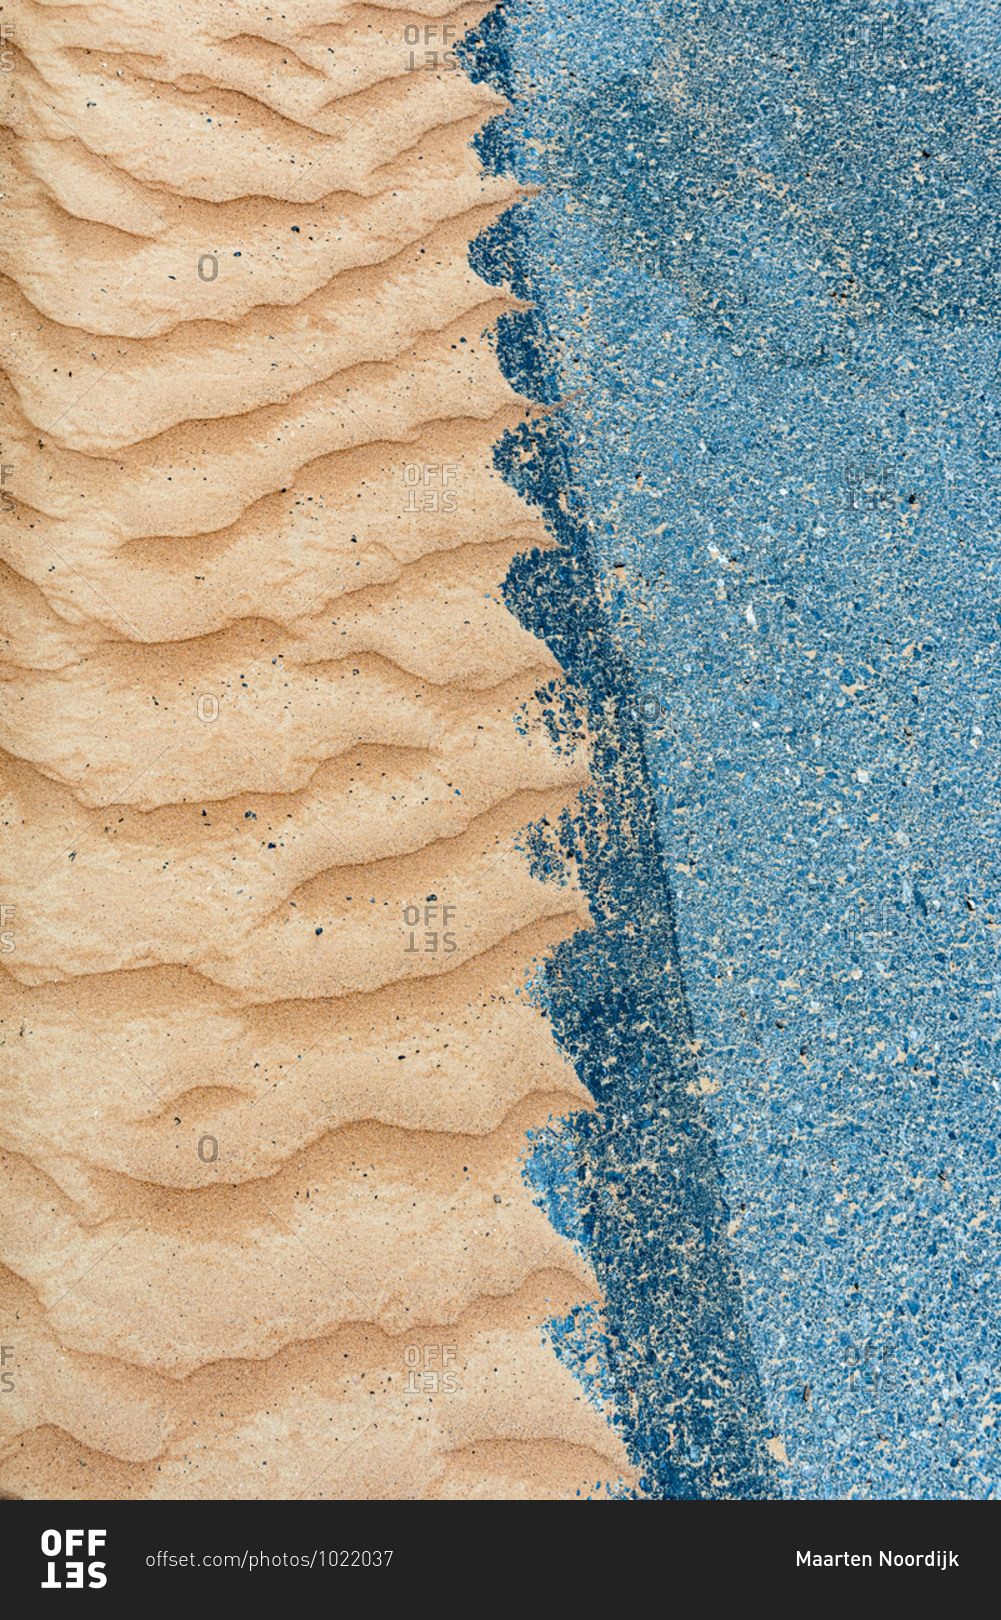 Desert sand and a concrete road meet on the edge of the desert in United Arab Emirates